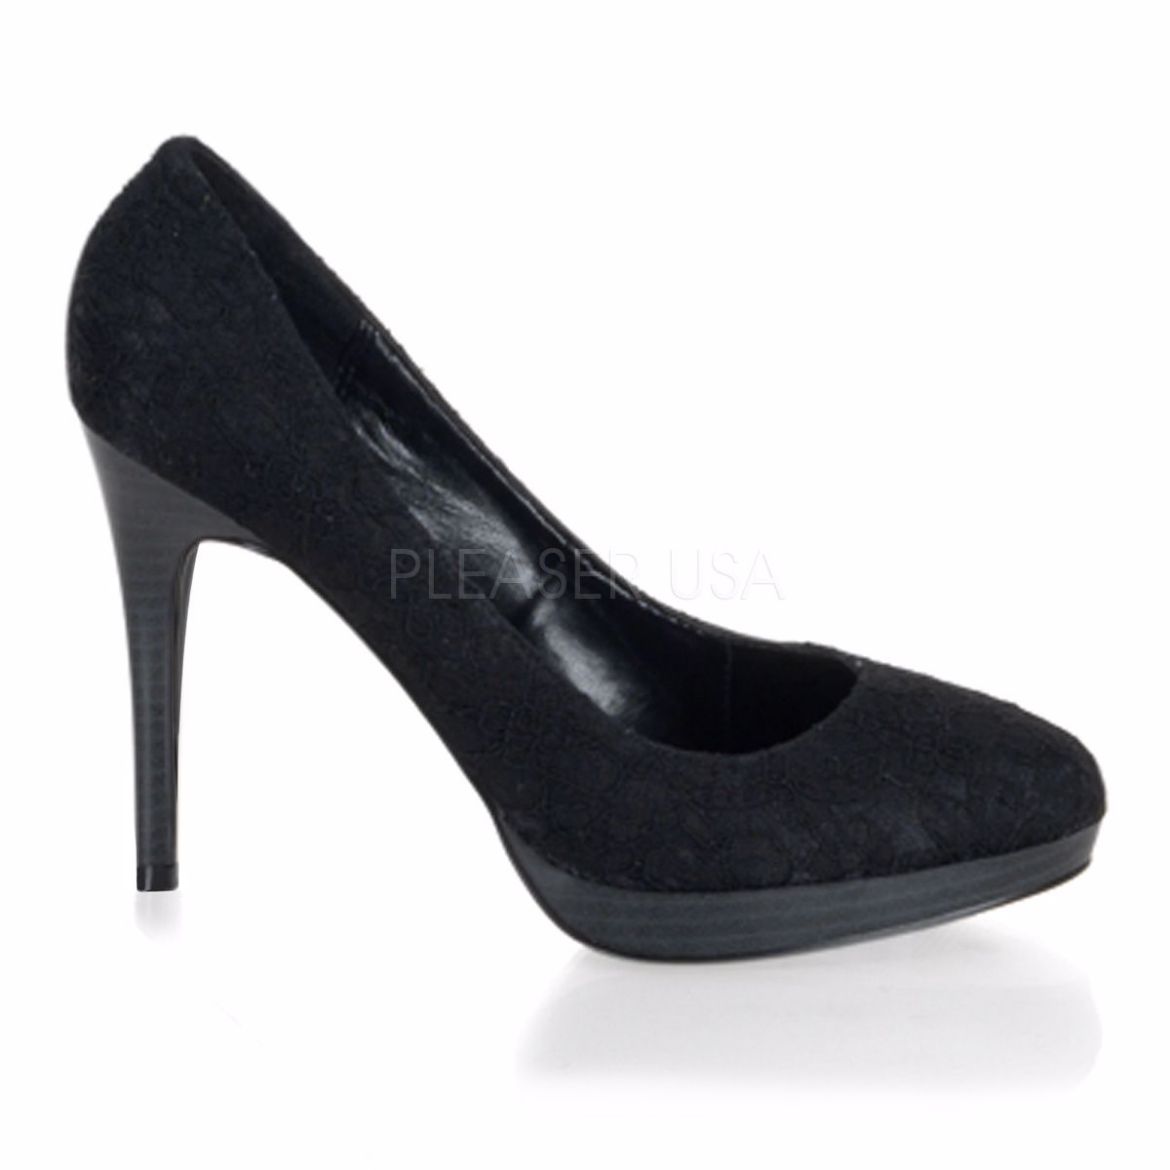 Product image of Pin Up Couture Bliss-30-2 Black Satin-Black Lace, 4 1/4 inch (10.8 cm) Heel, 3/4 inch (1.9 cm) Platform Court Pump Shoes